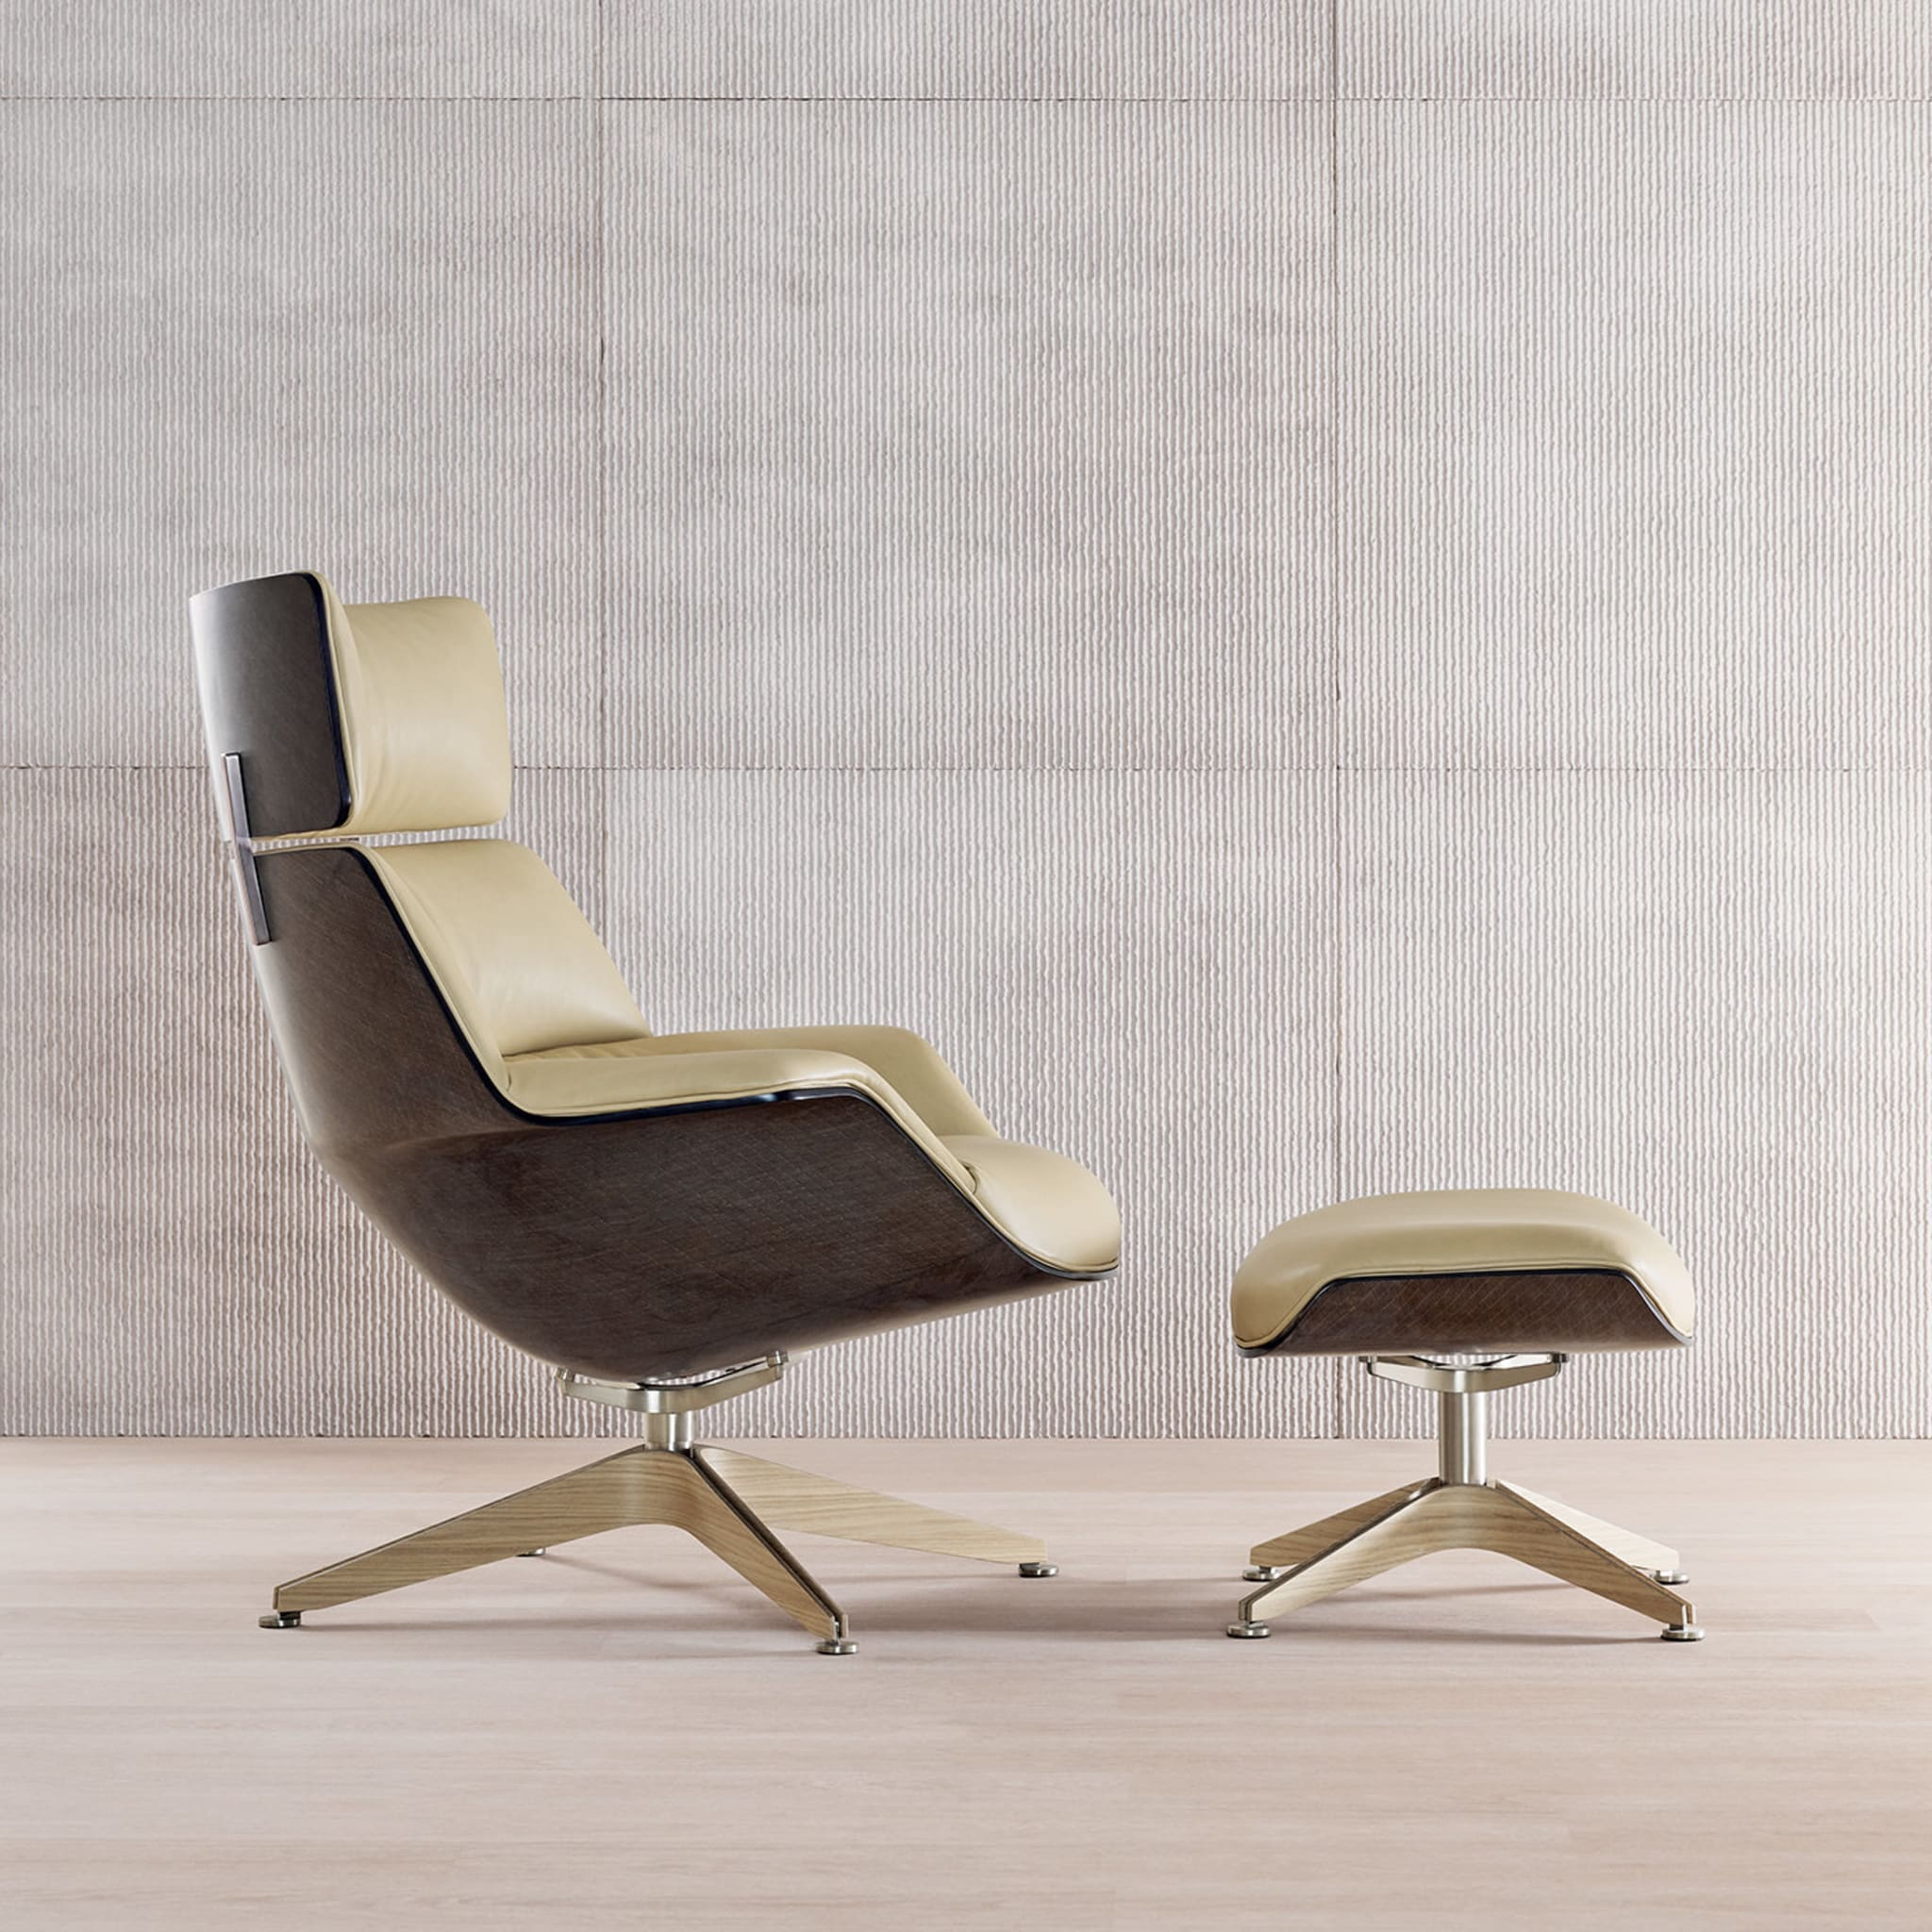 Saintluc Coach Lounge Chair and Pouf by Jean-Marie Massaud - Alternative view 4